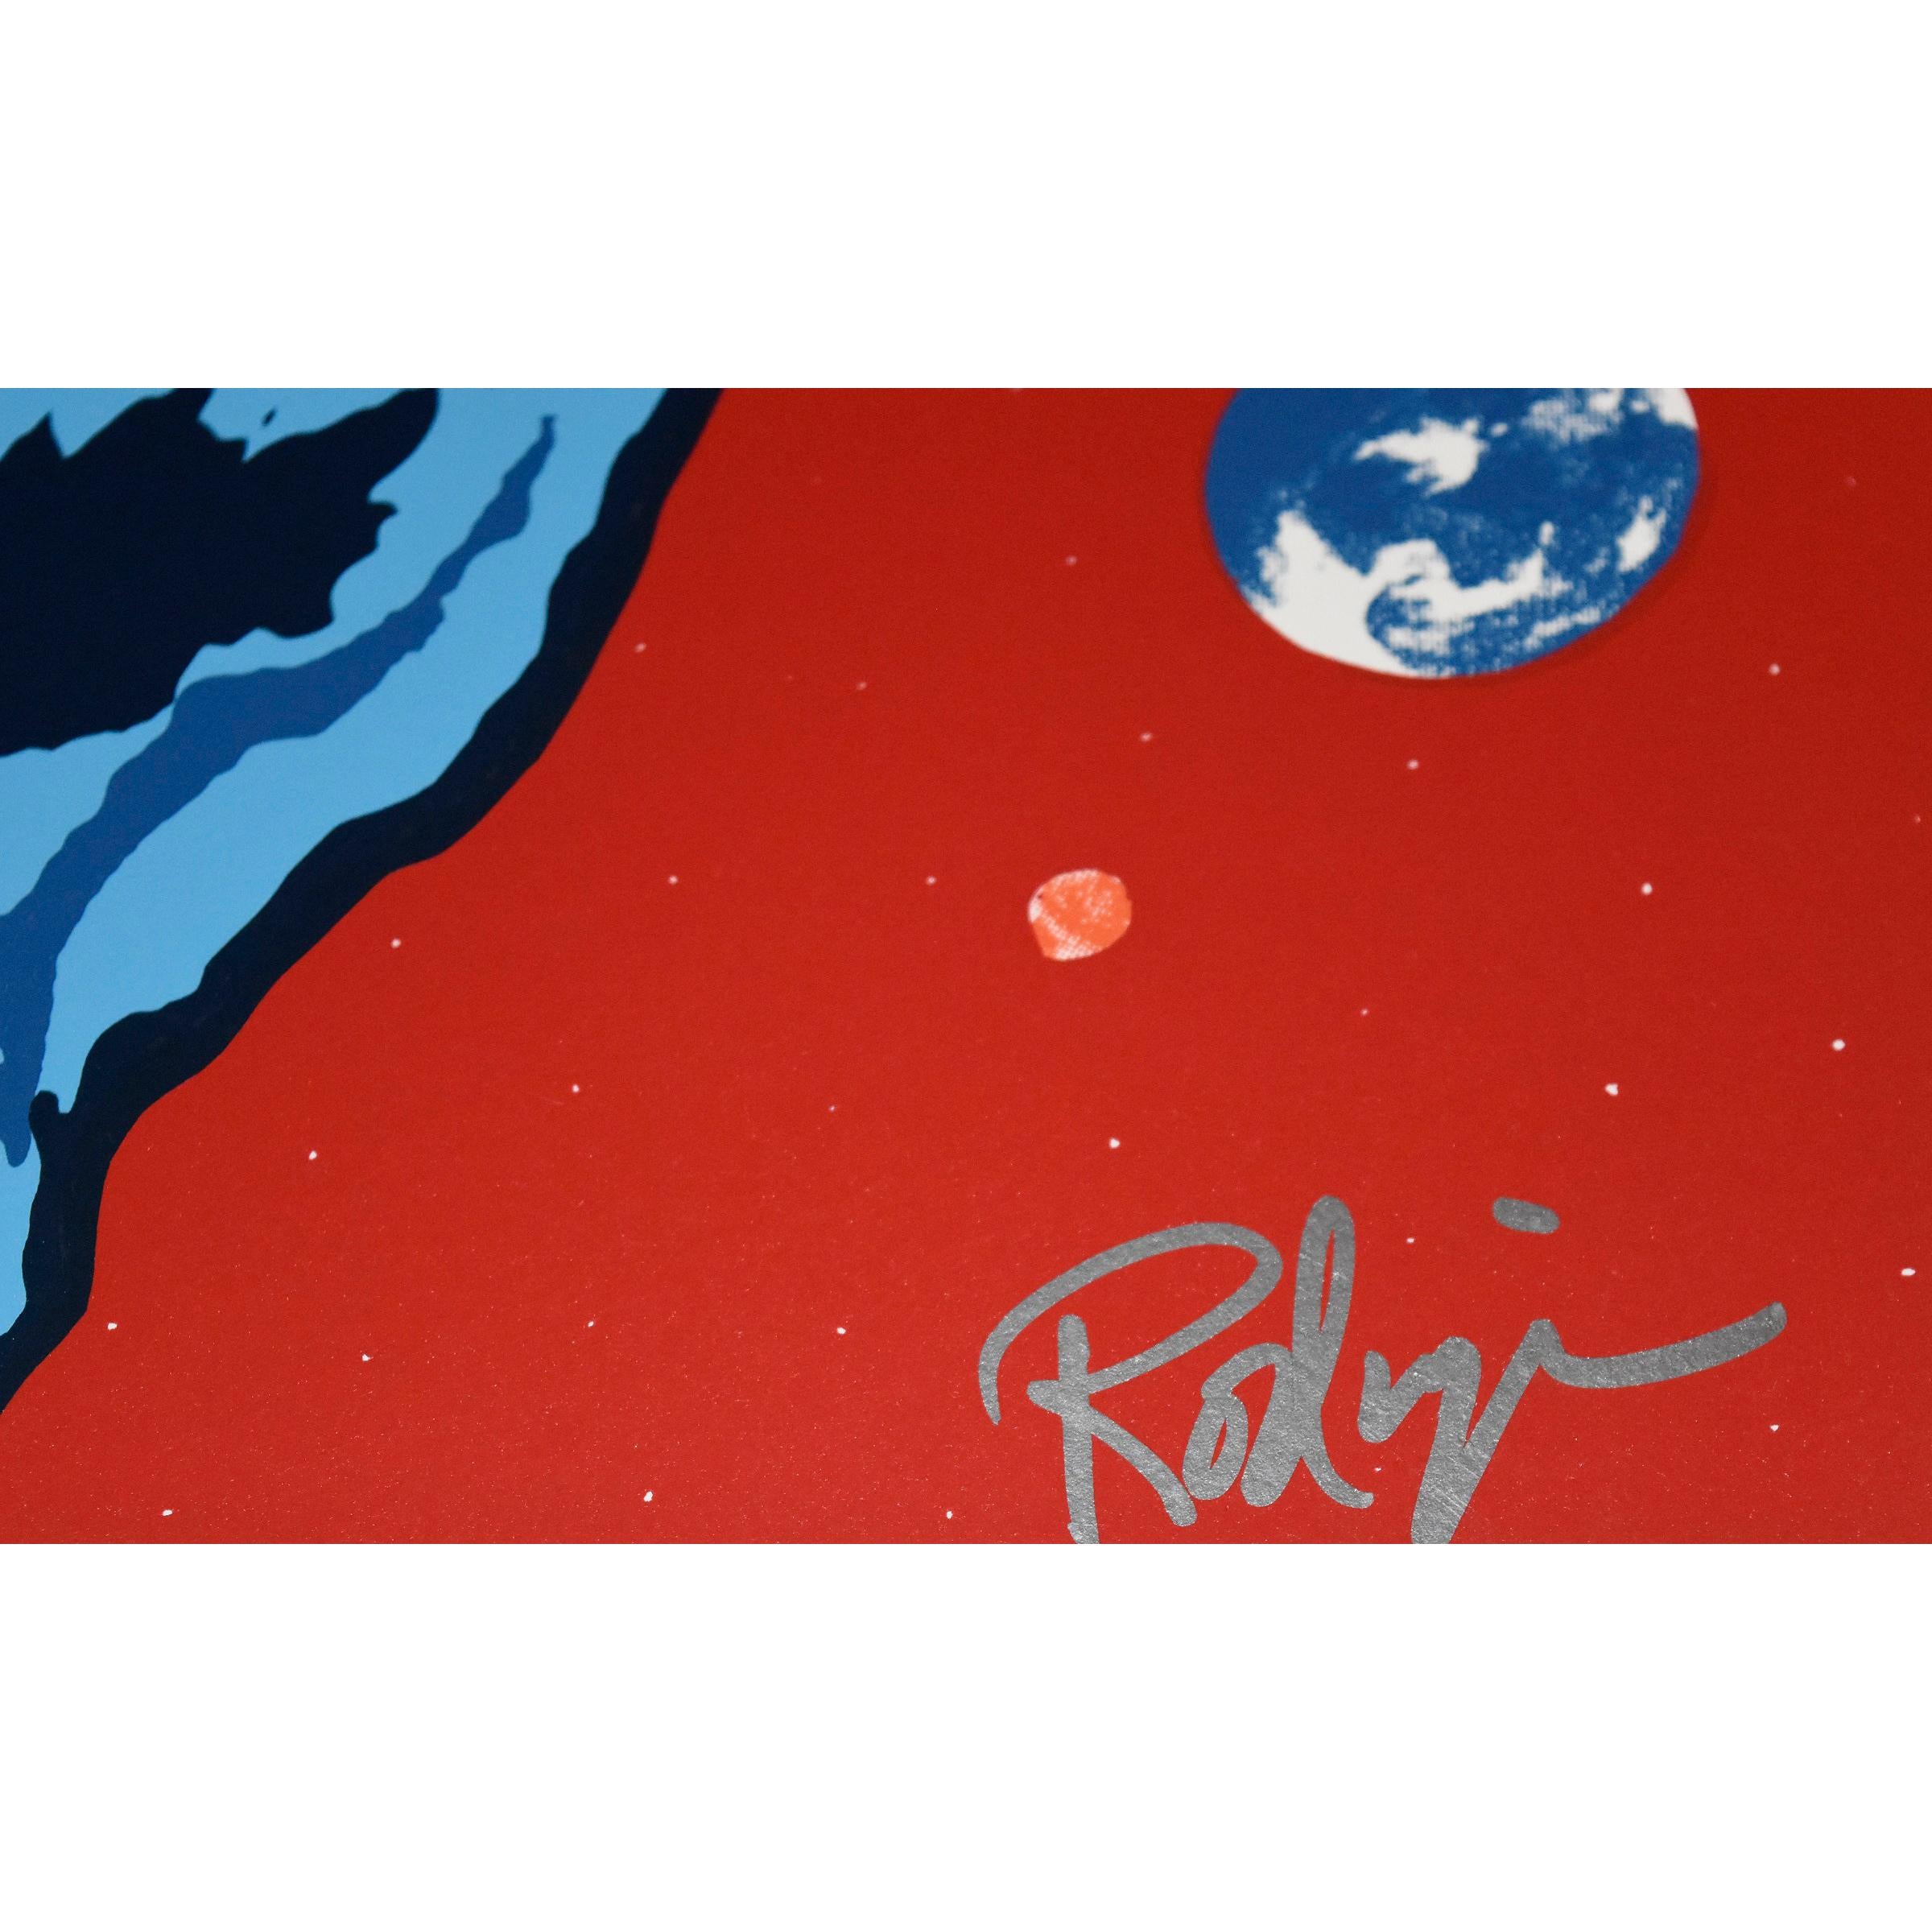 Tiffany's Universe - Red - Signed Silkscreen Print For Sale 2